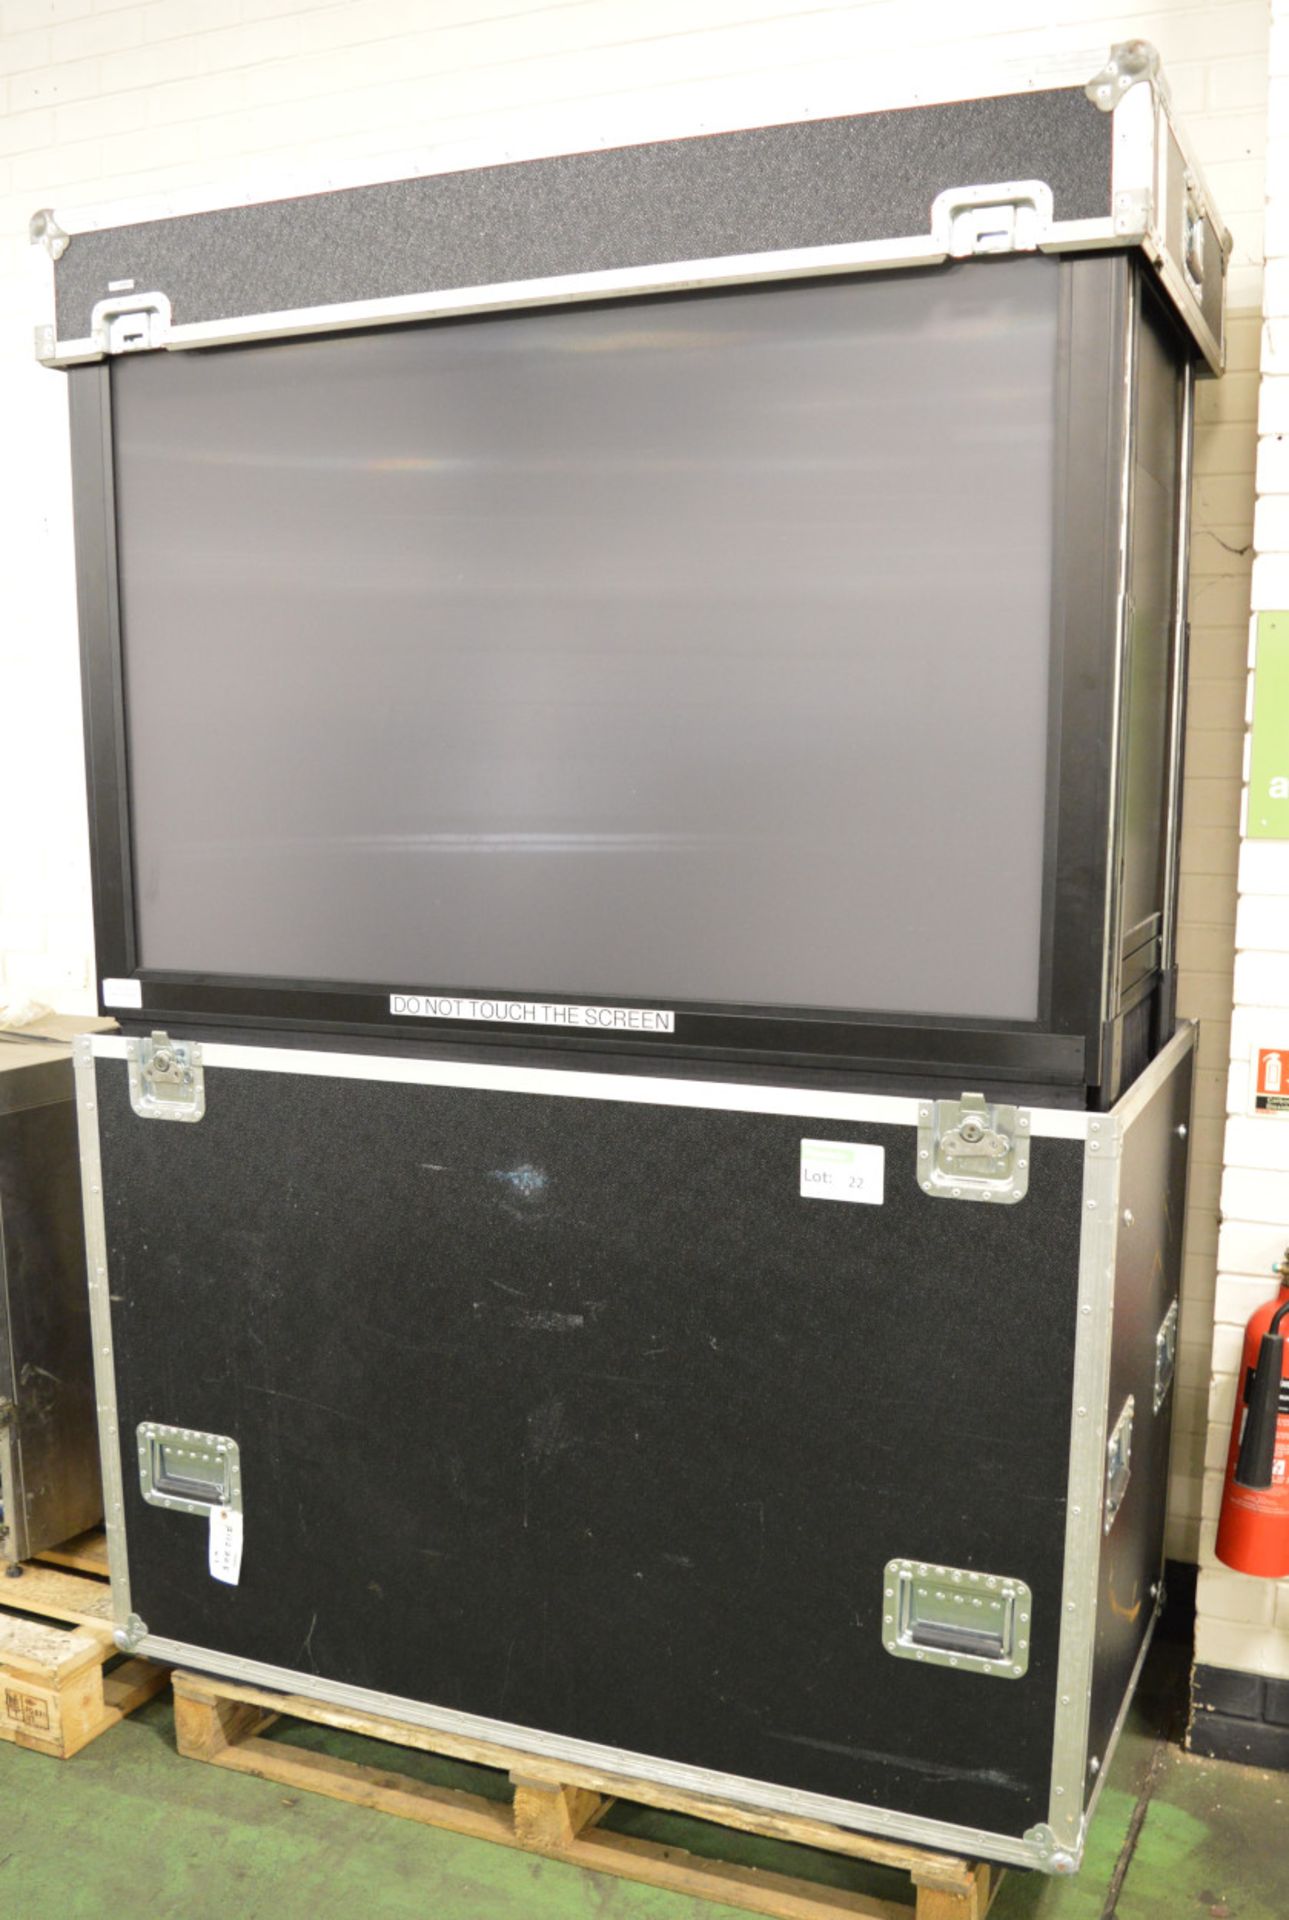 Portable Projection Screen in Carry Case - 2050mm high x 1440mm x 760mm deep